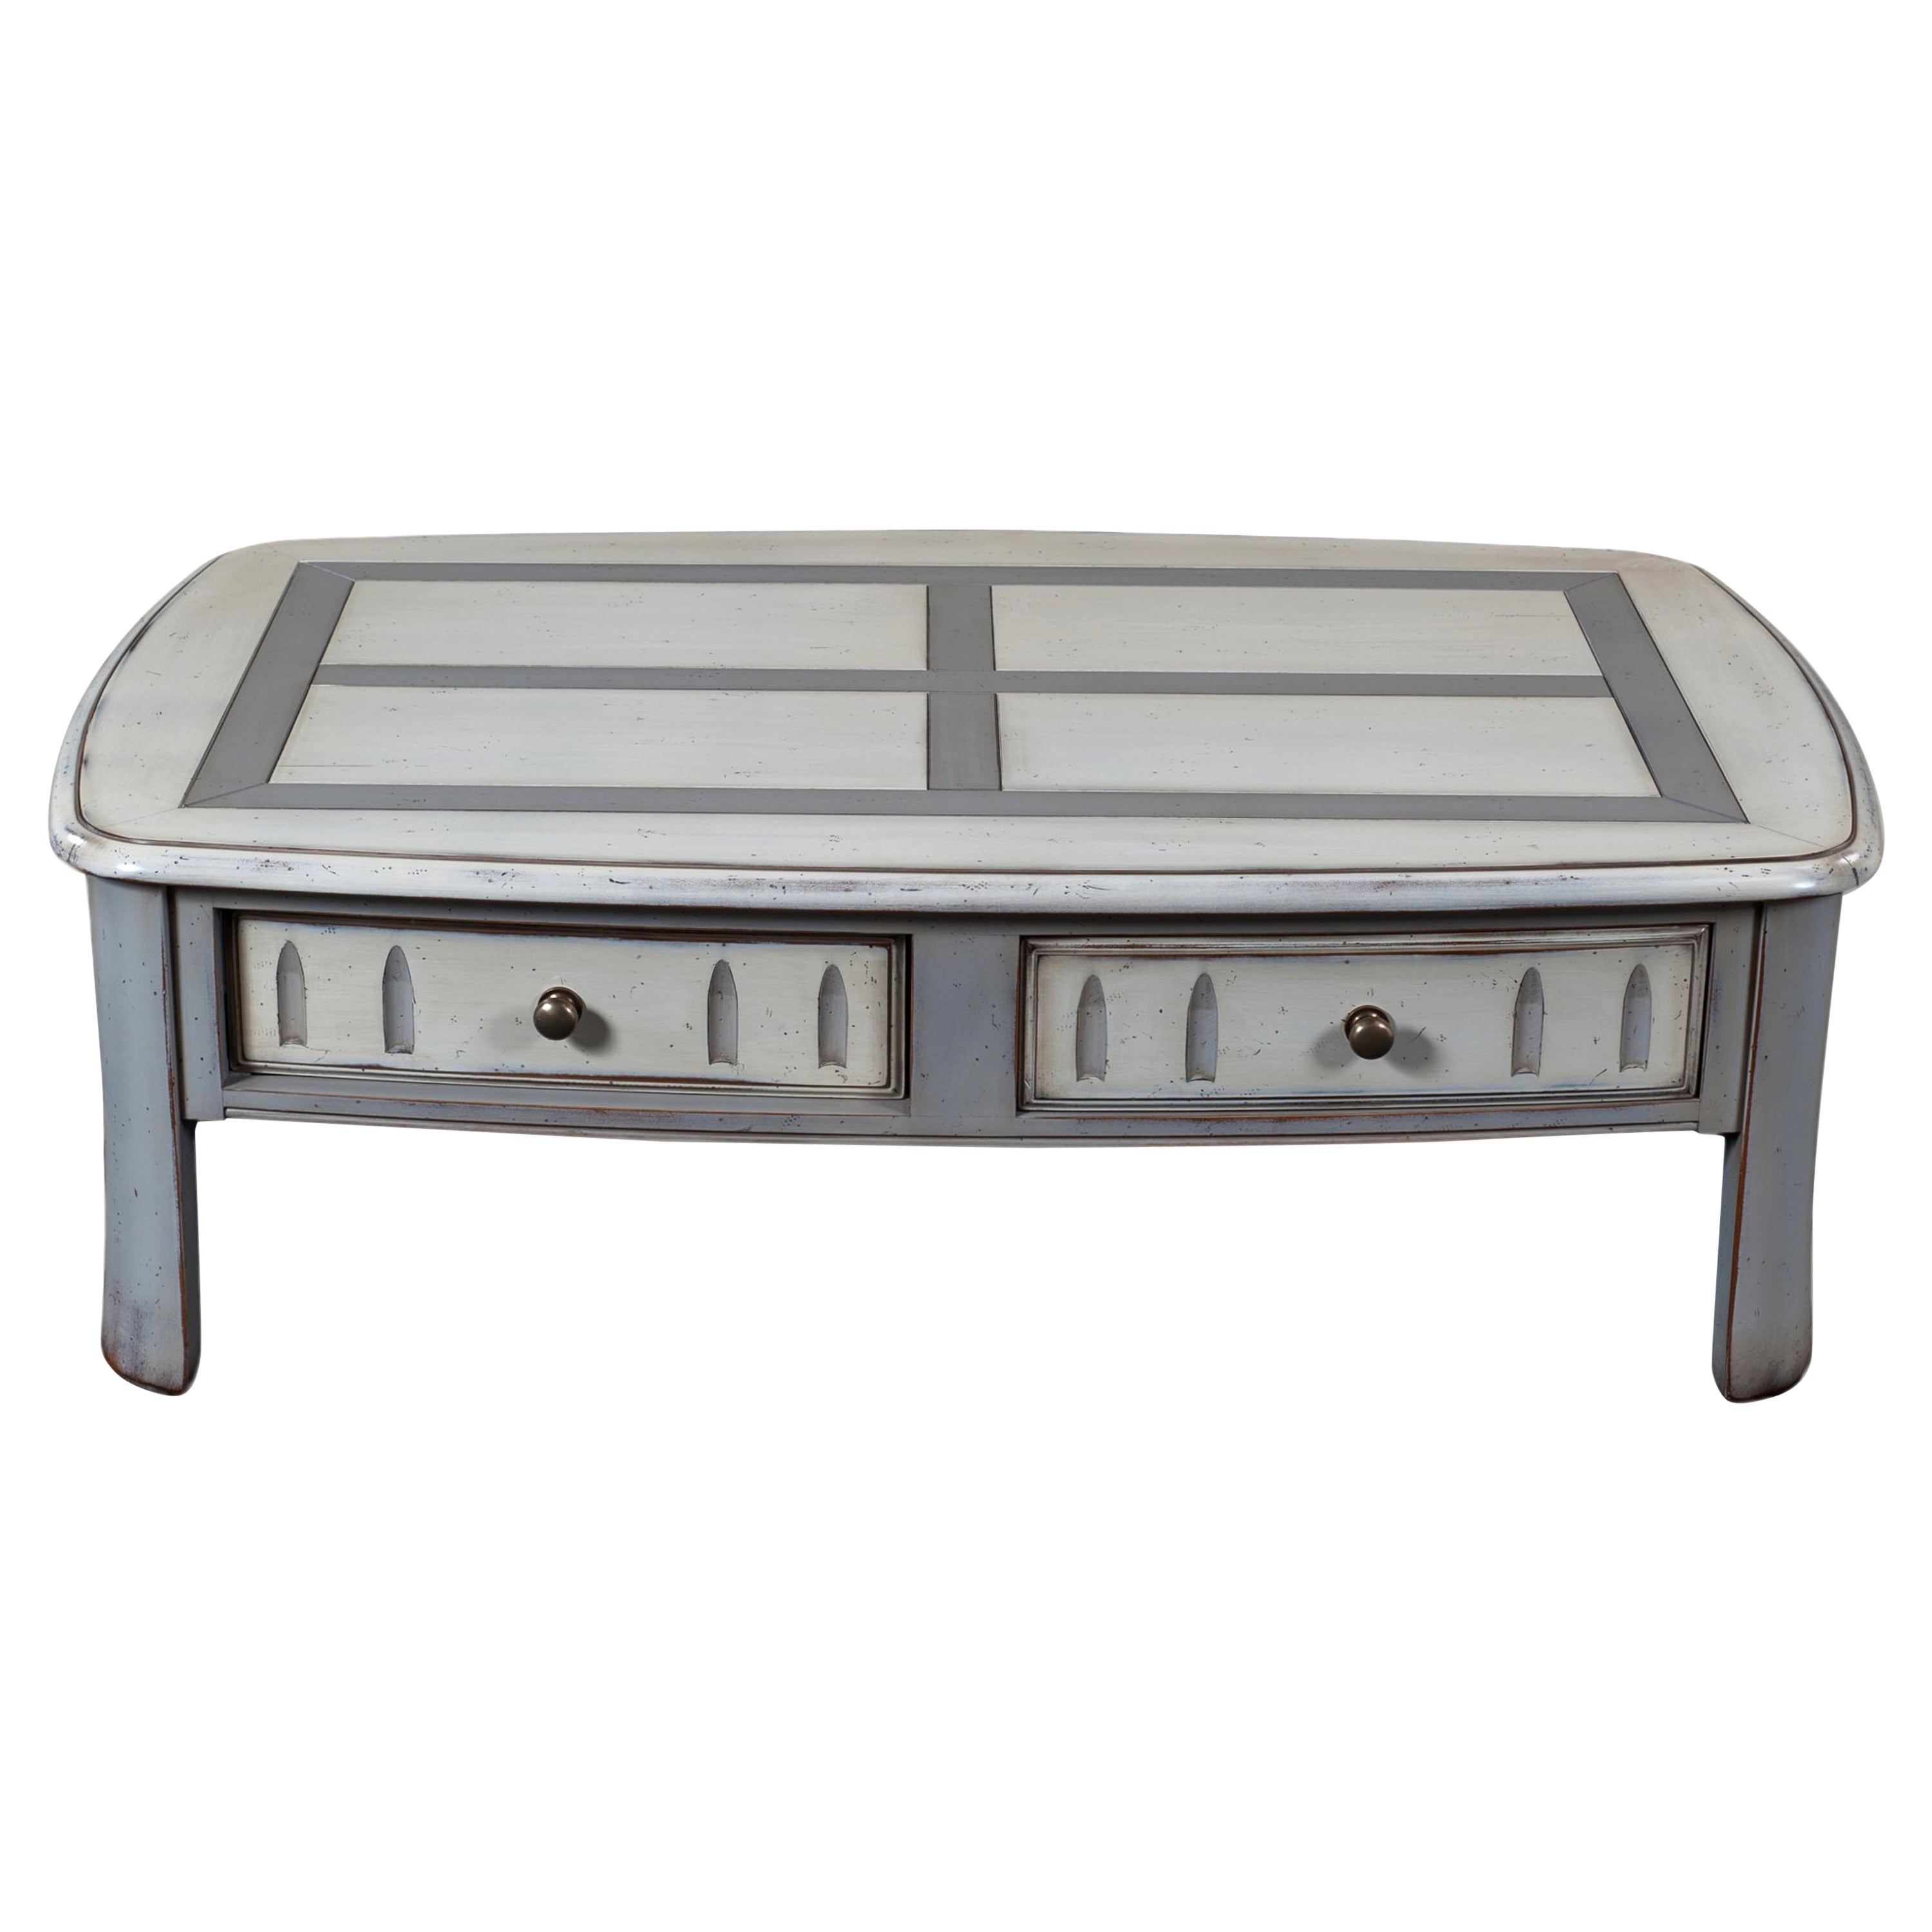 Cherry Coffee Table, One Drawer, French Countryside Style, Shabby Finish